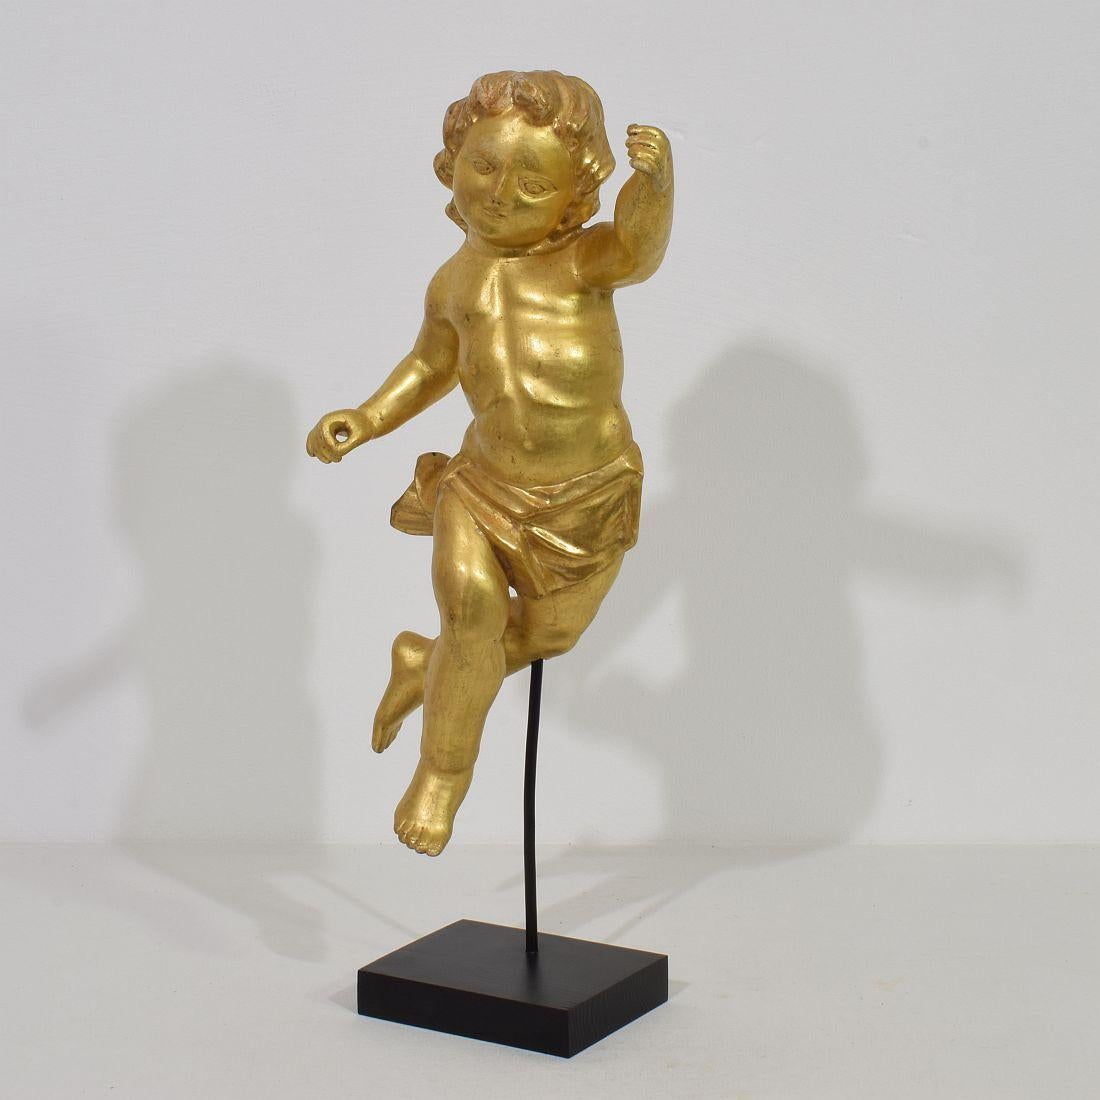 Very nice handcarved giltwood neoclassical angel,
Italy, circa 1780-1820.
Weathered, small losses
Measurements include the wooden base.